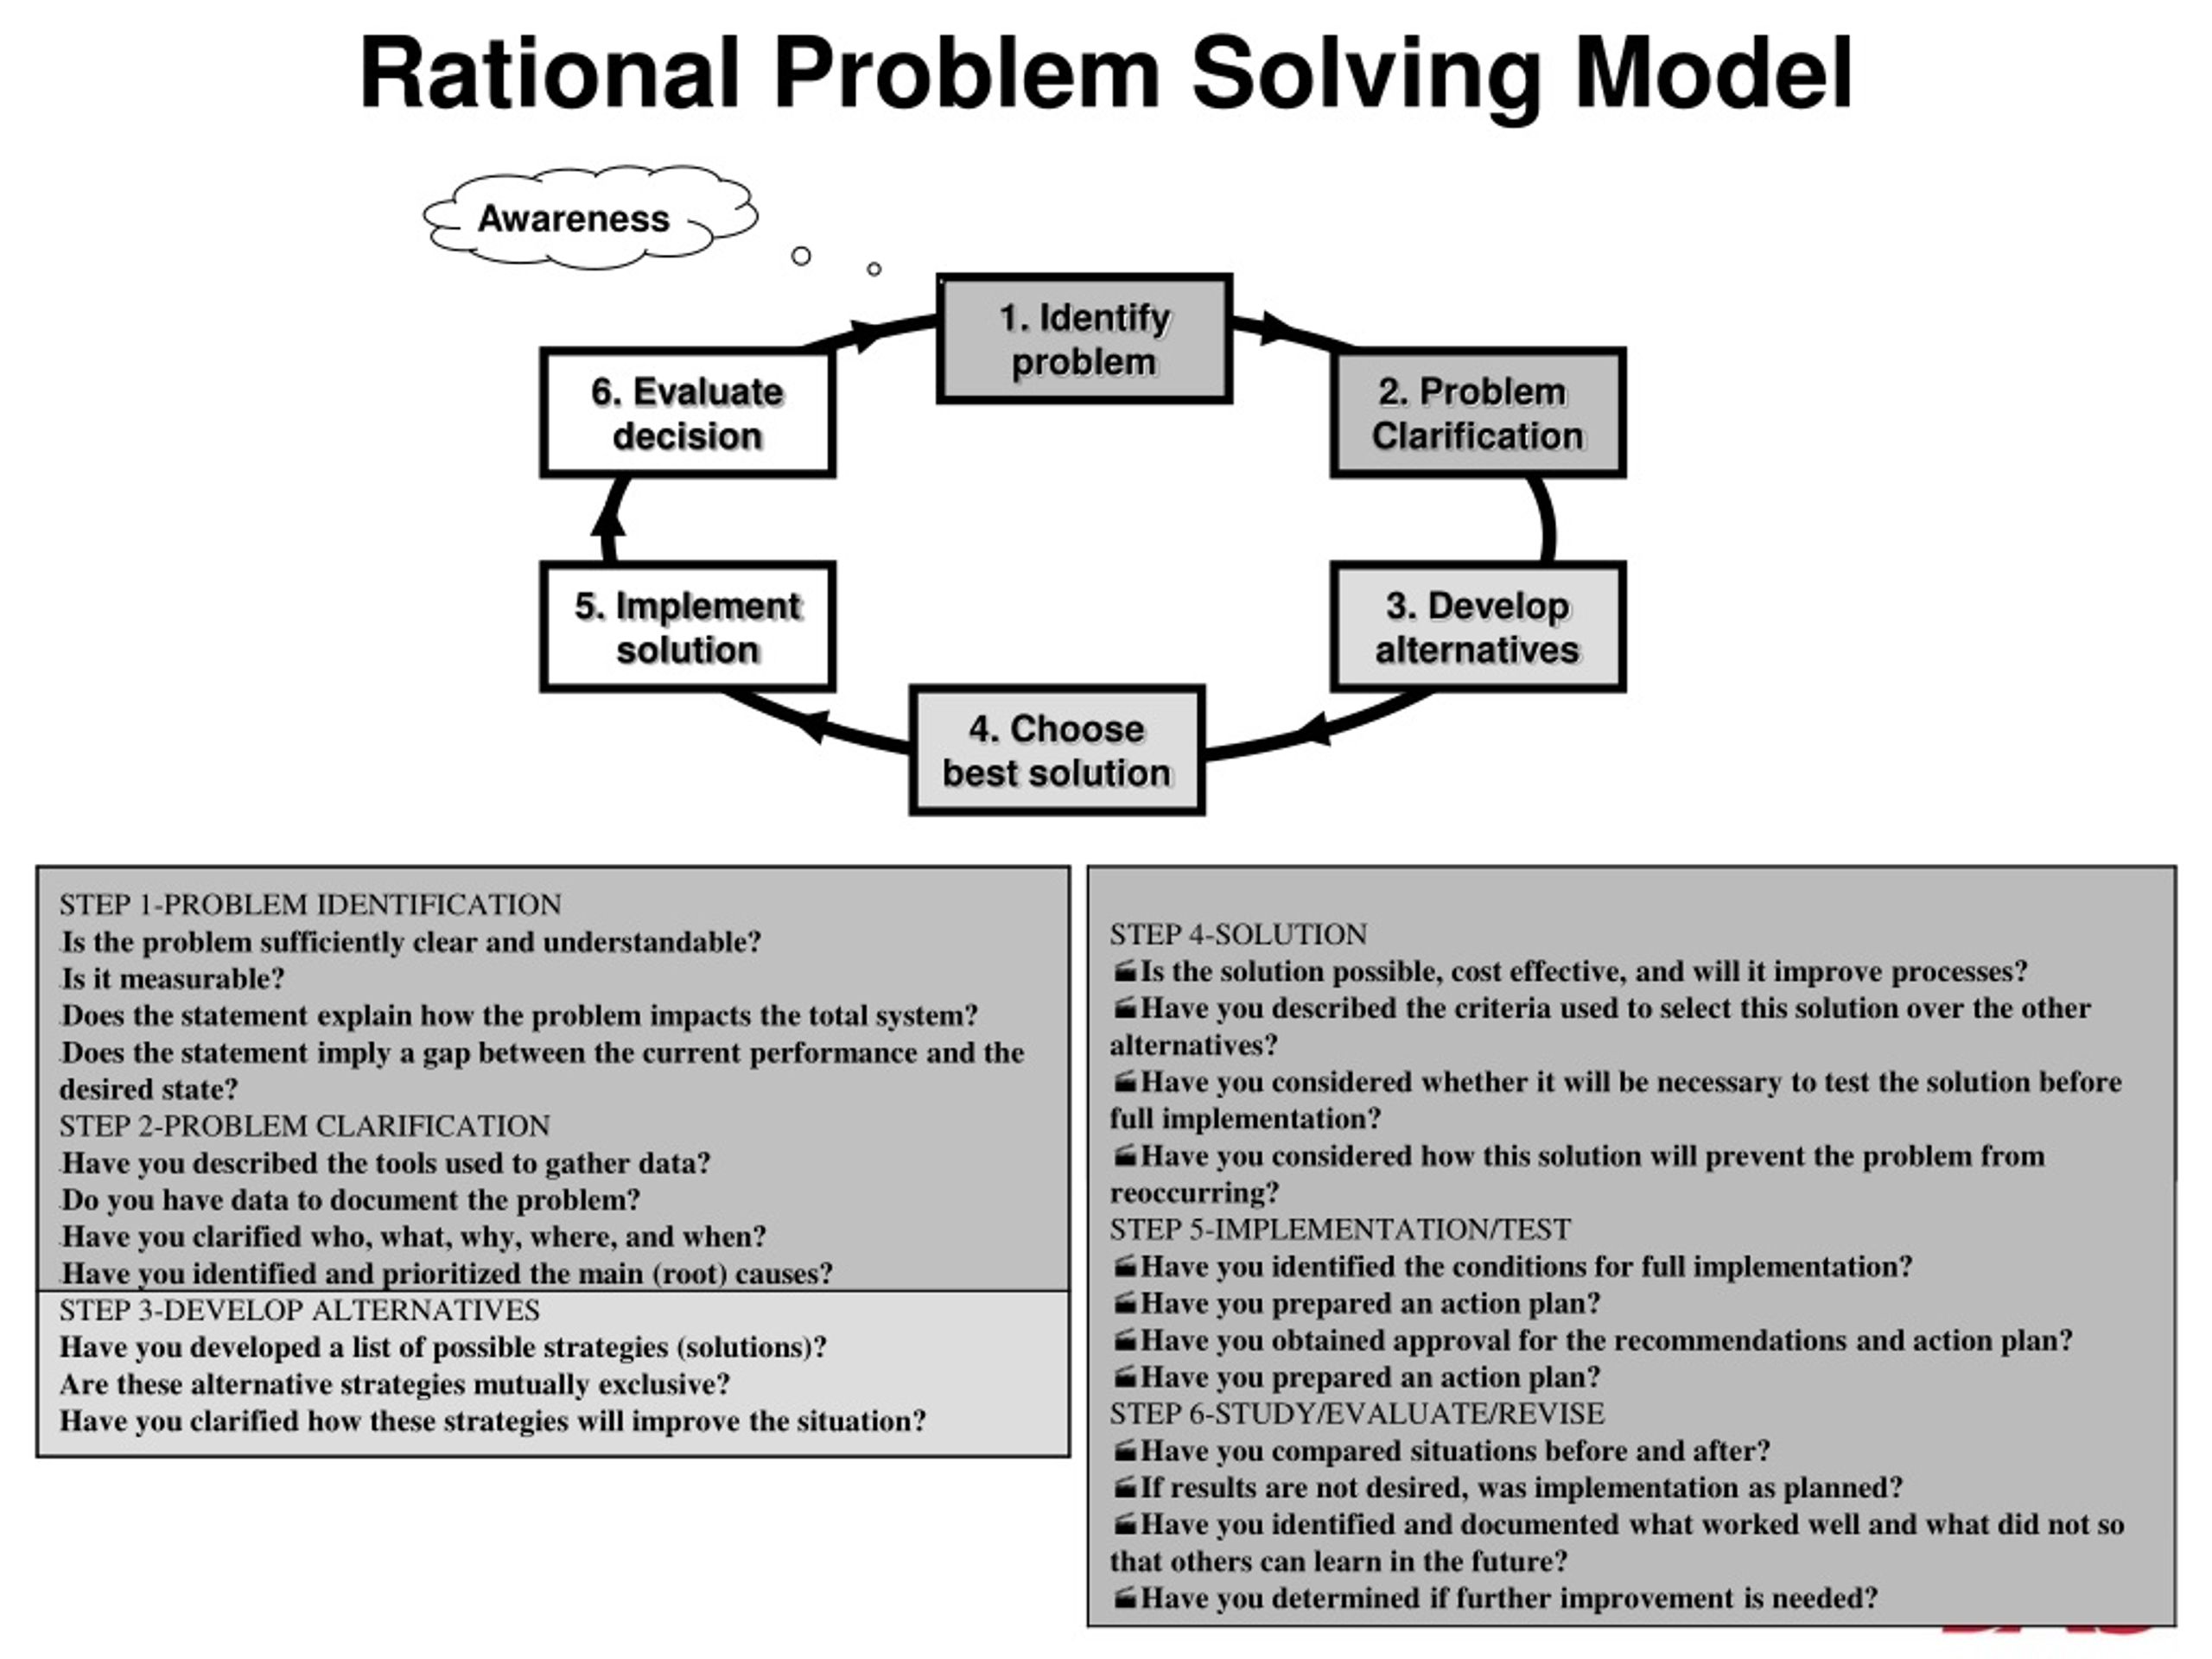 the rational problem solving process